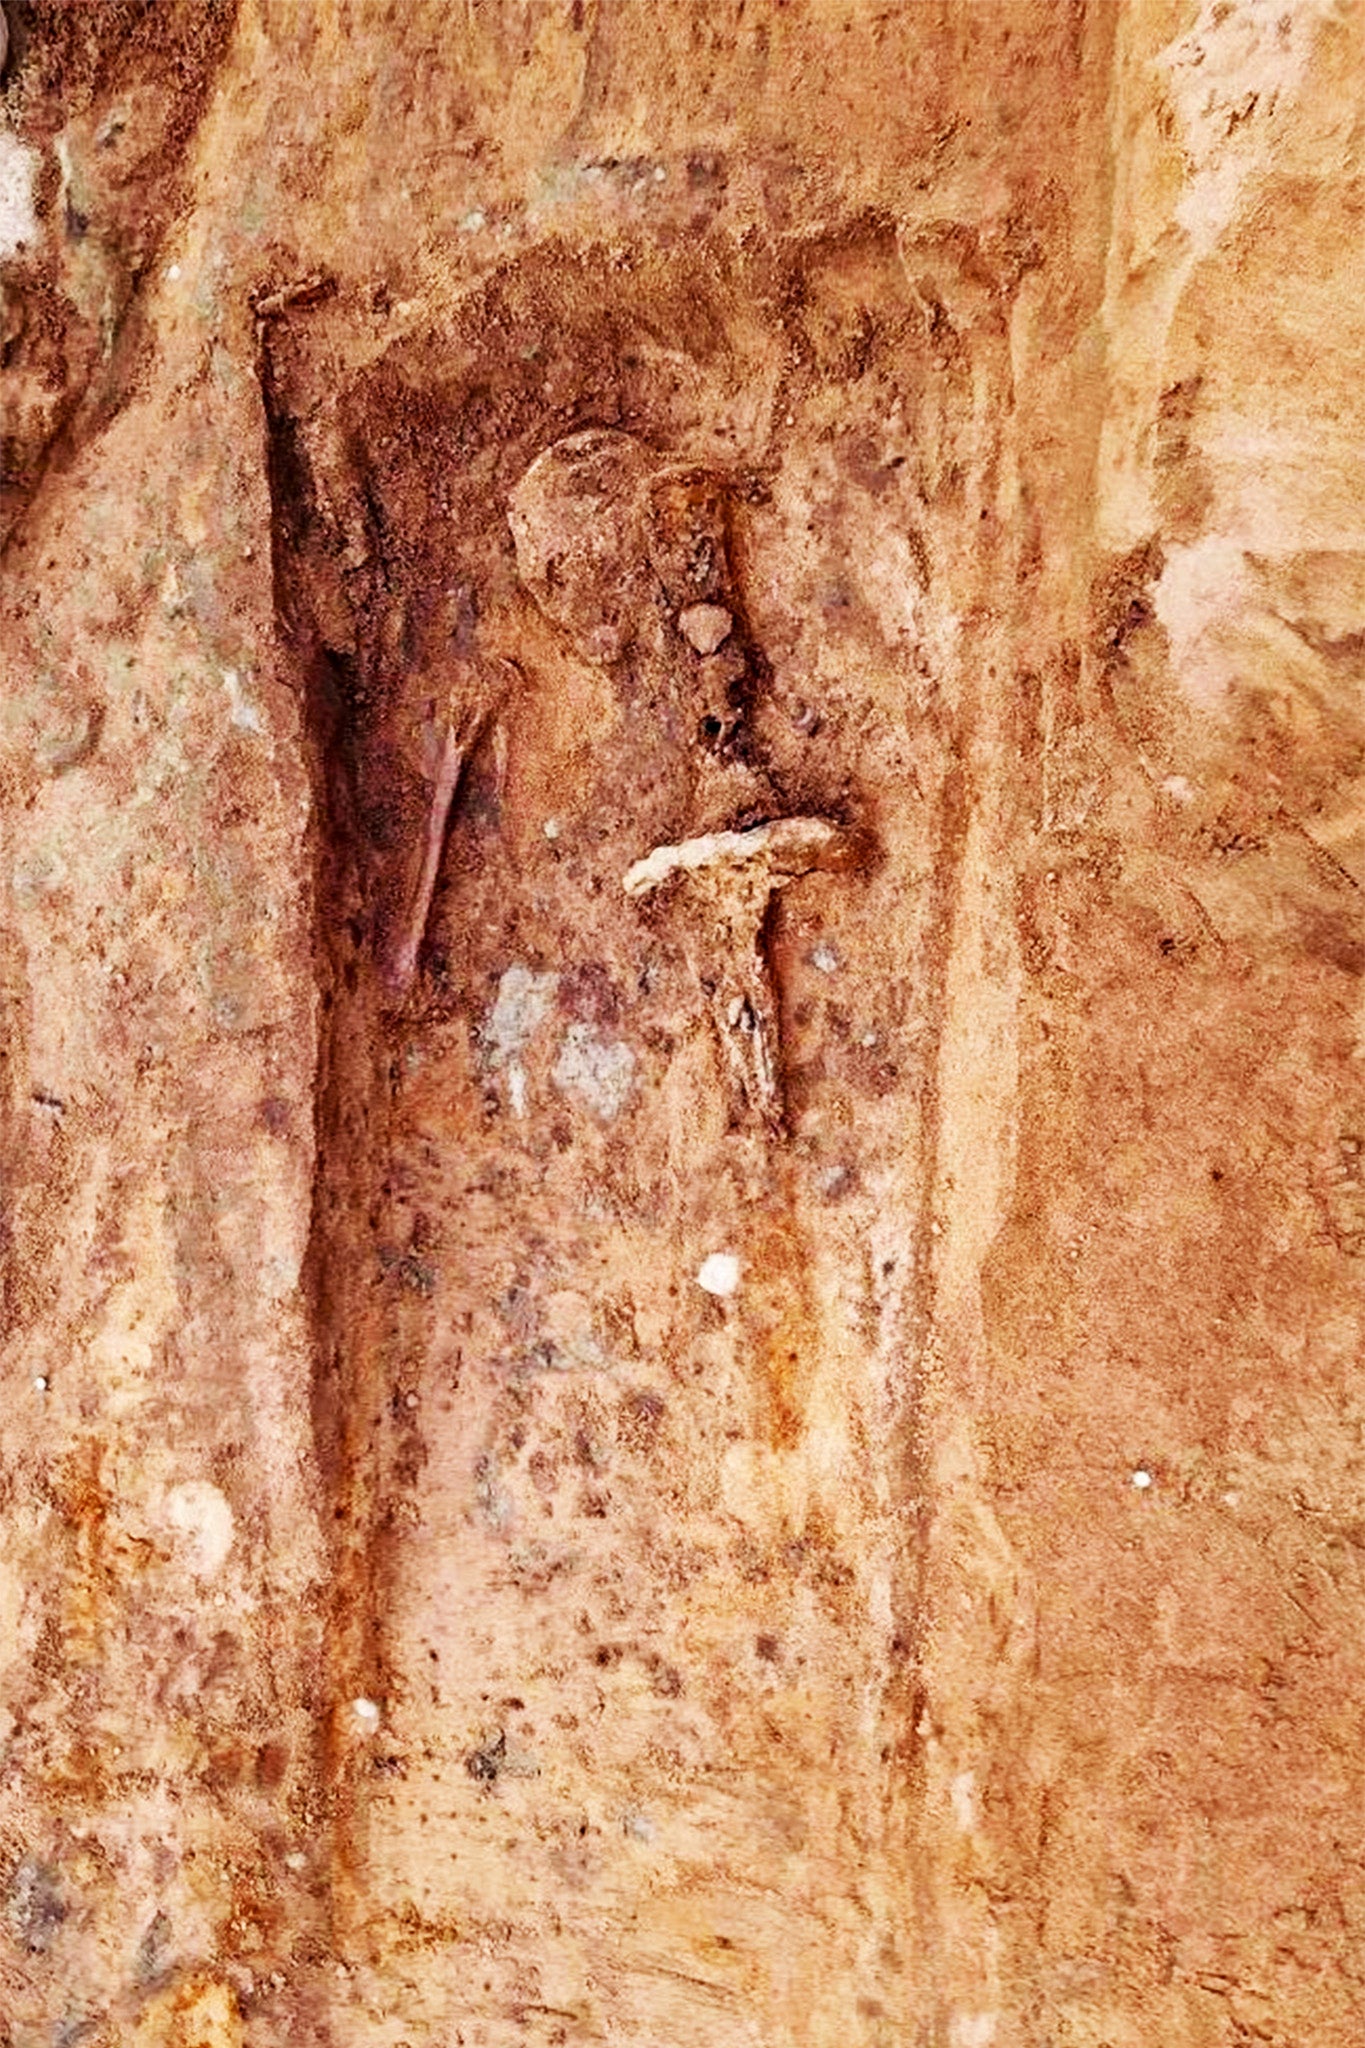 Photo of the grave where the sword was found, here during excavation. The buried man’s skull and upper arm are visible in the image. The sword was placed on his left side where the hilt is preserved